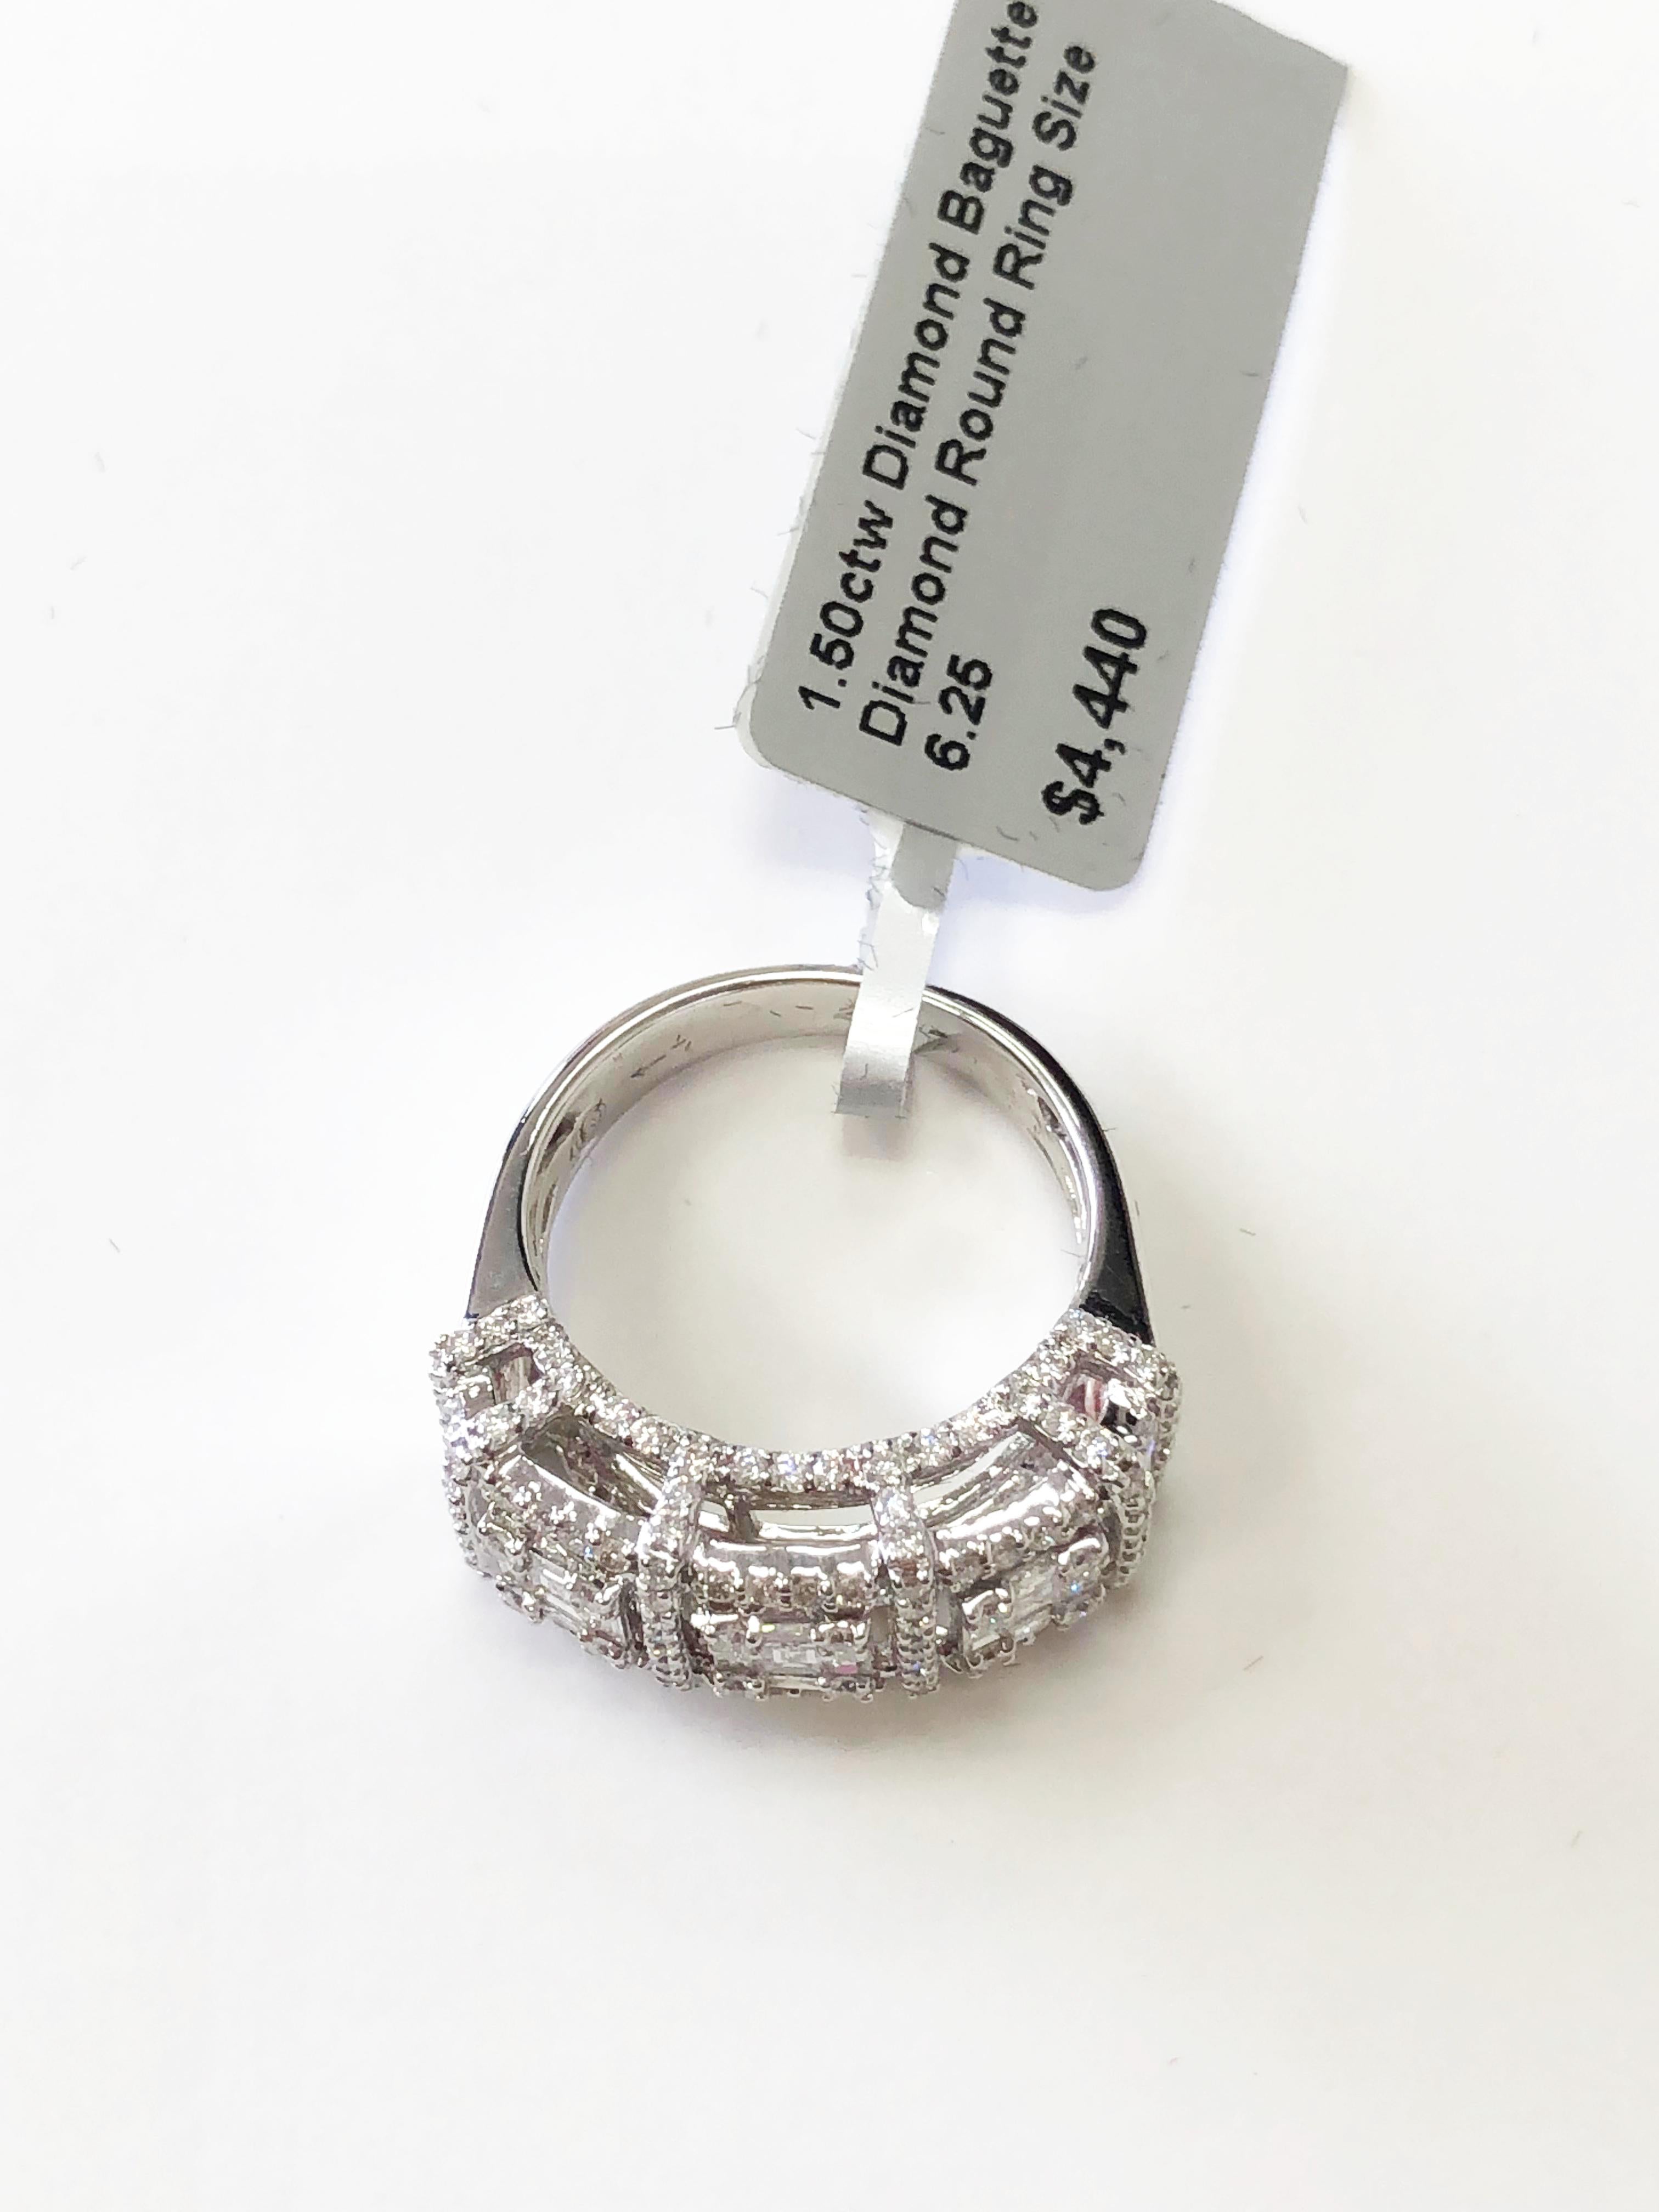 Beautiful invisible set diamond cocktail ring. 1.50 carats of good quality white, bright diamond rounds and baguettes in this ring. The stones are set in a way that it makes them look like bigger individual stones. A great price for a big look!